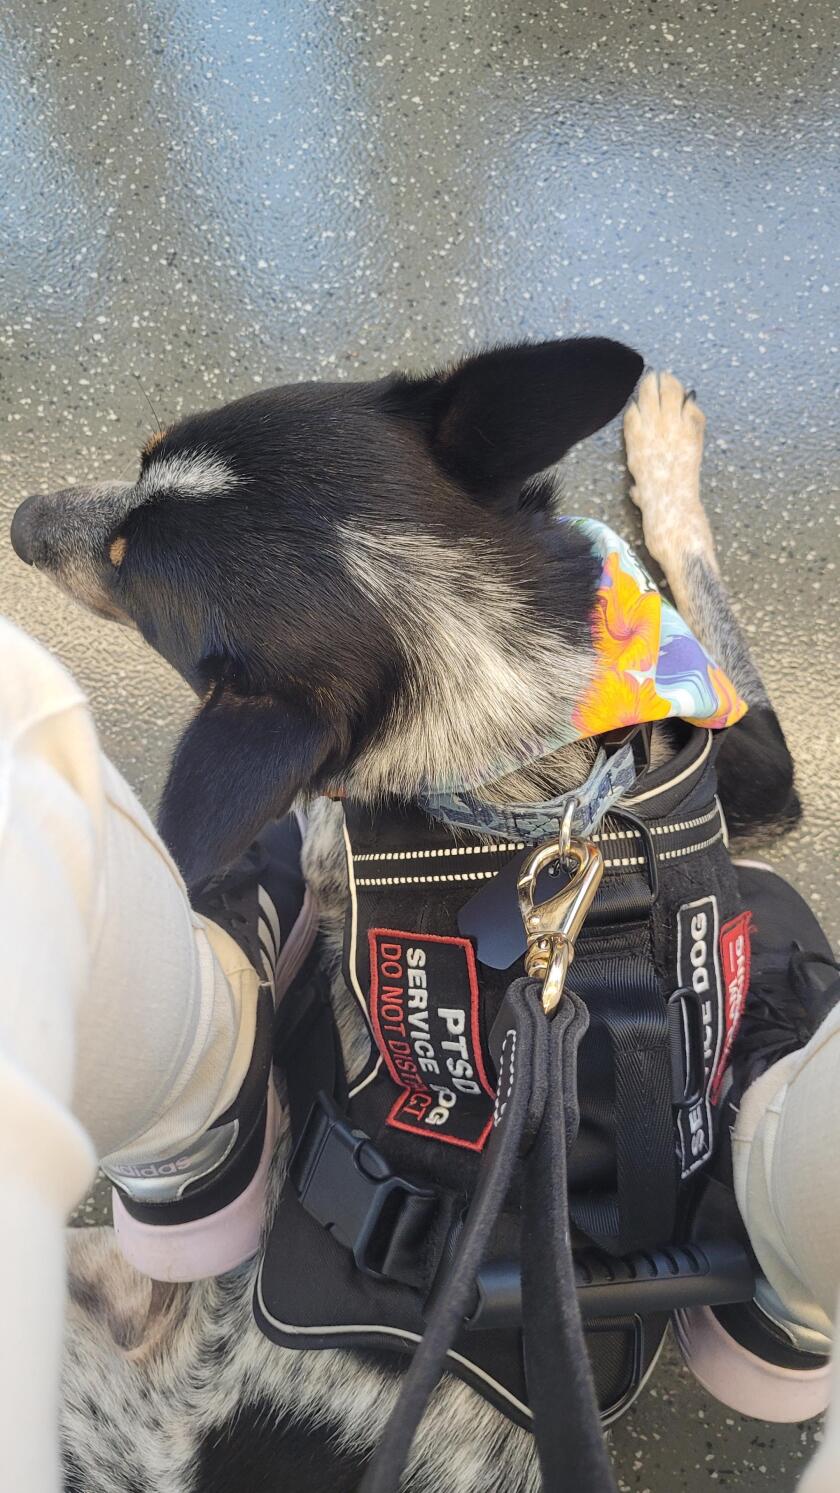 Meeka's vest shows that she is a service dog.